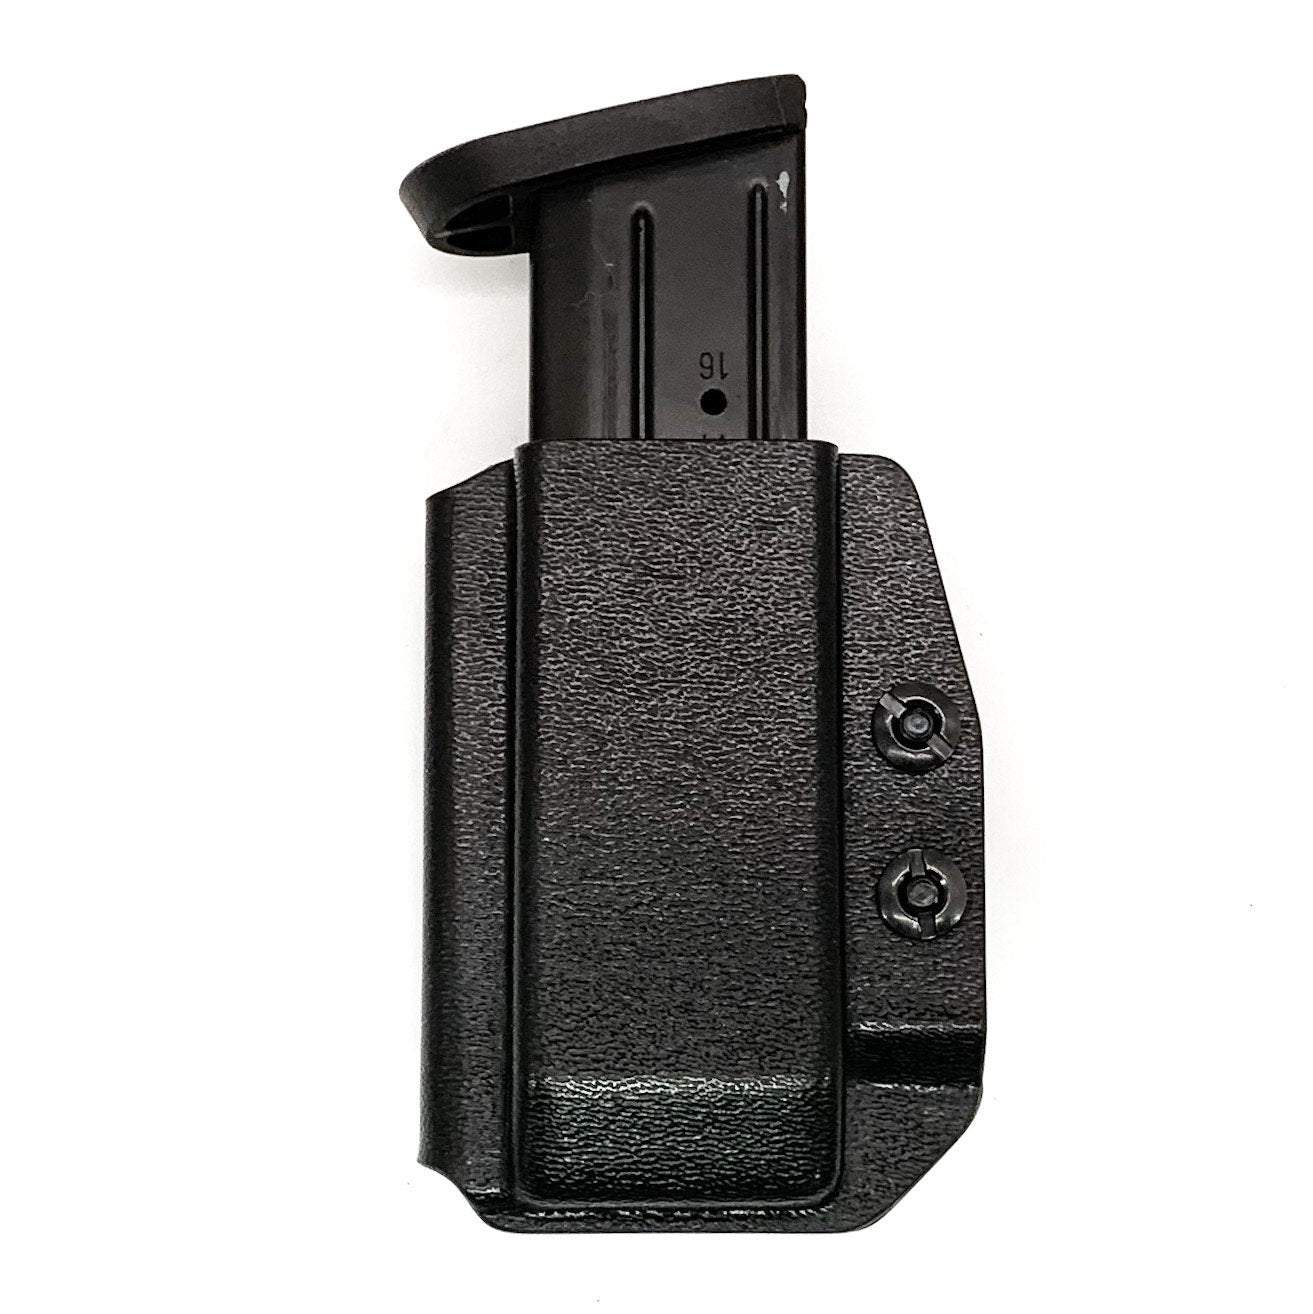 For the best, Inside Waistband IWB AIWB Smith & Wesson M&P 9mm or .40 magazine carrier, holster, & pouch for the Sig P320, P365, P365XL, Glock 17, 17L, 19, 22, 23, 26, 27, 34, 35, 45, 31, 32, 33, .357 Sig, 9mm & 40 Walther, Arex, H&K, and 509, 509T, LS EDGE FN magazines, shop Four Brothers Holsters. 4BROS, Made in USA